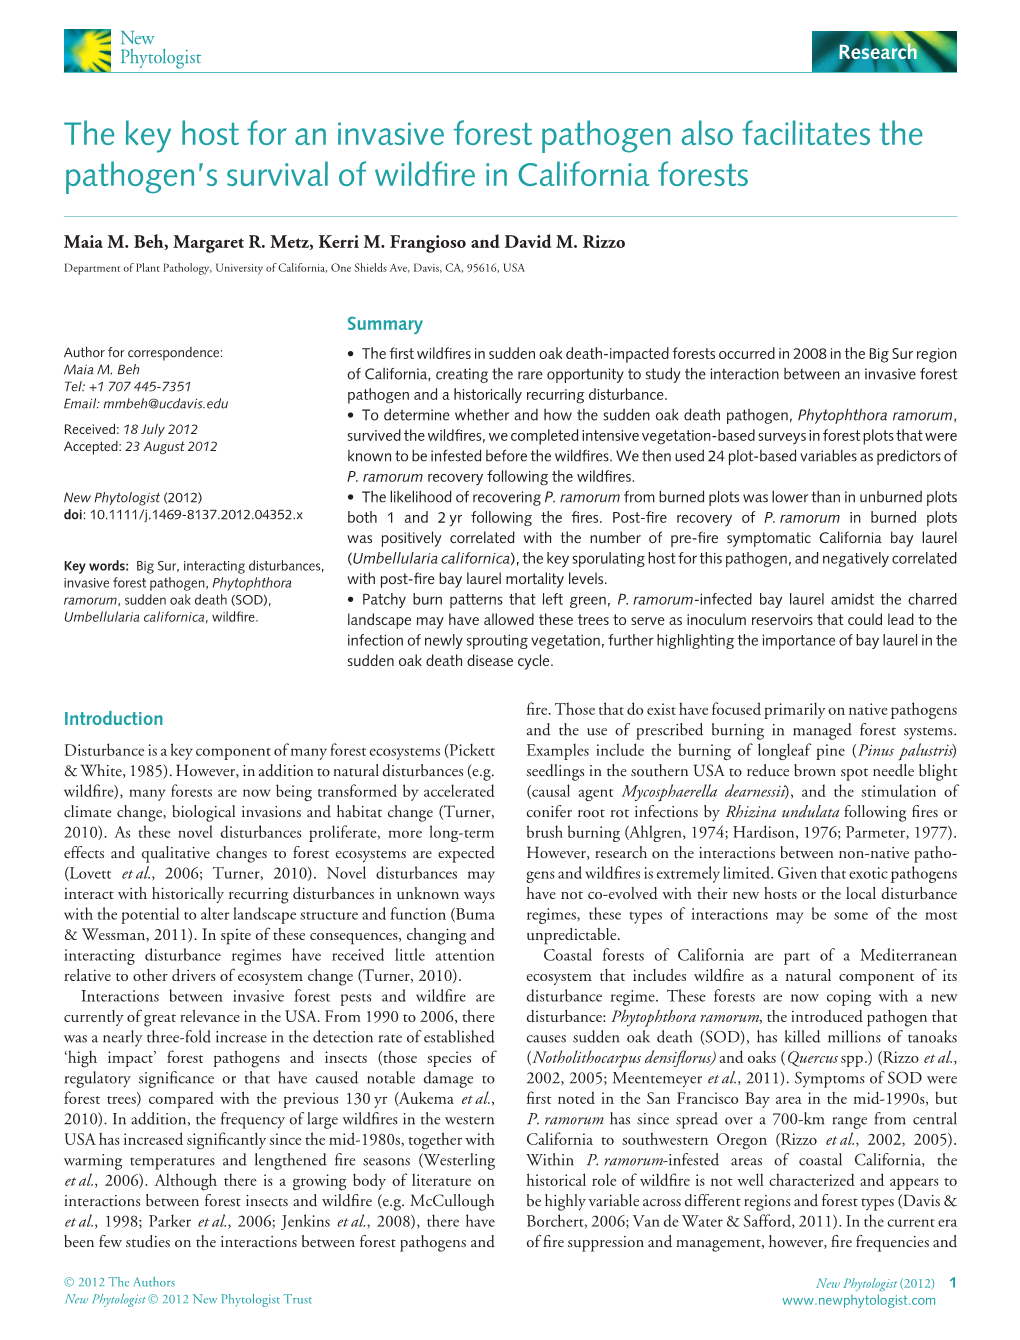 The Key Host for an Invasive Forest Pathogen Also Facilitates the Pathogen’S Survival of Wildﬁre in California Forests